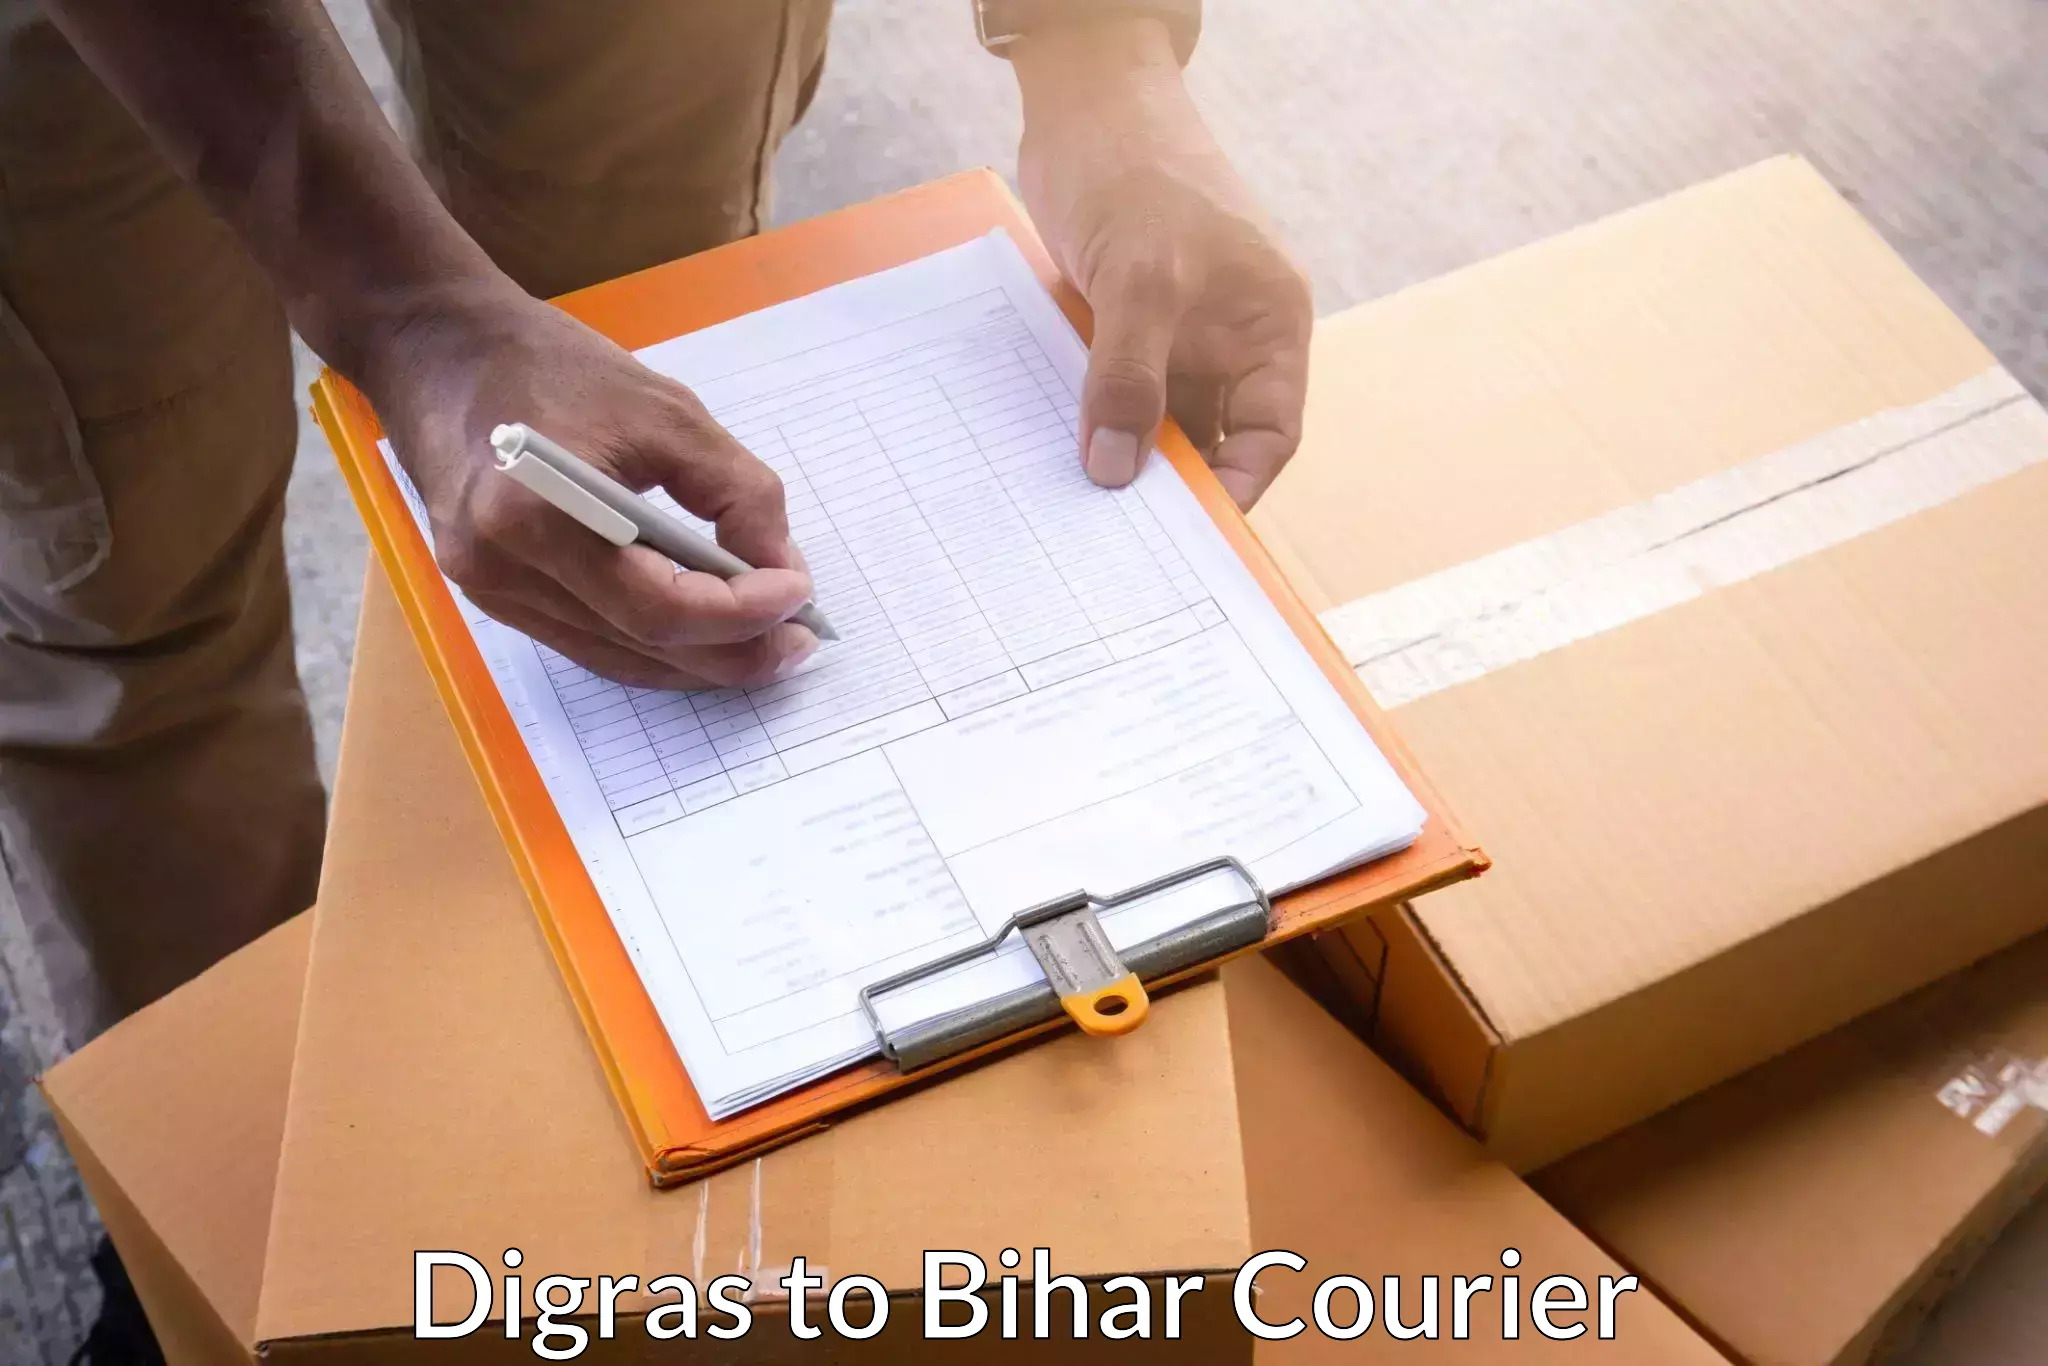 Nationwide shipping coverage Digras to Dehri